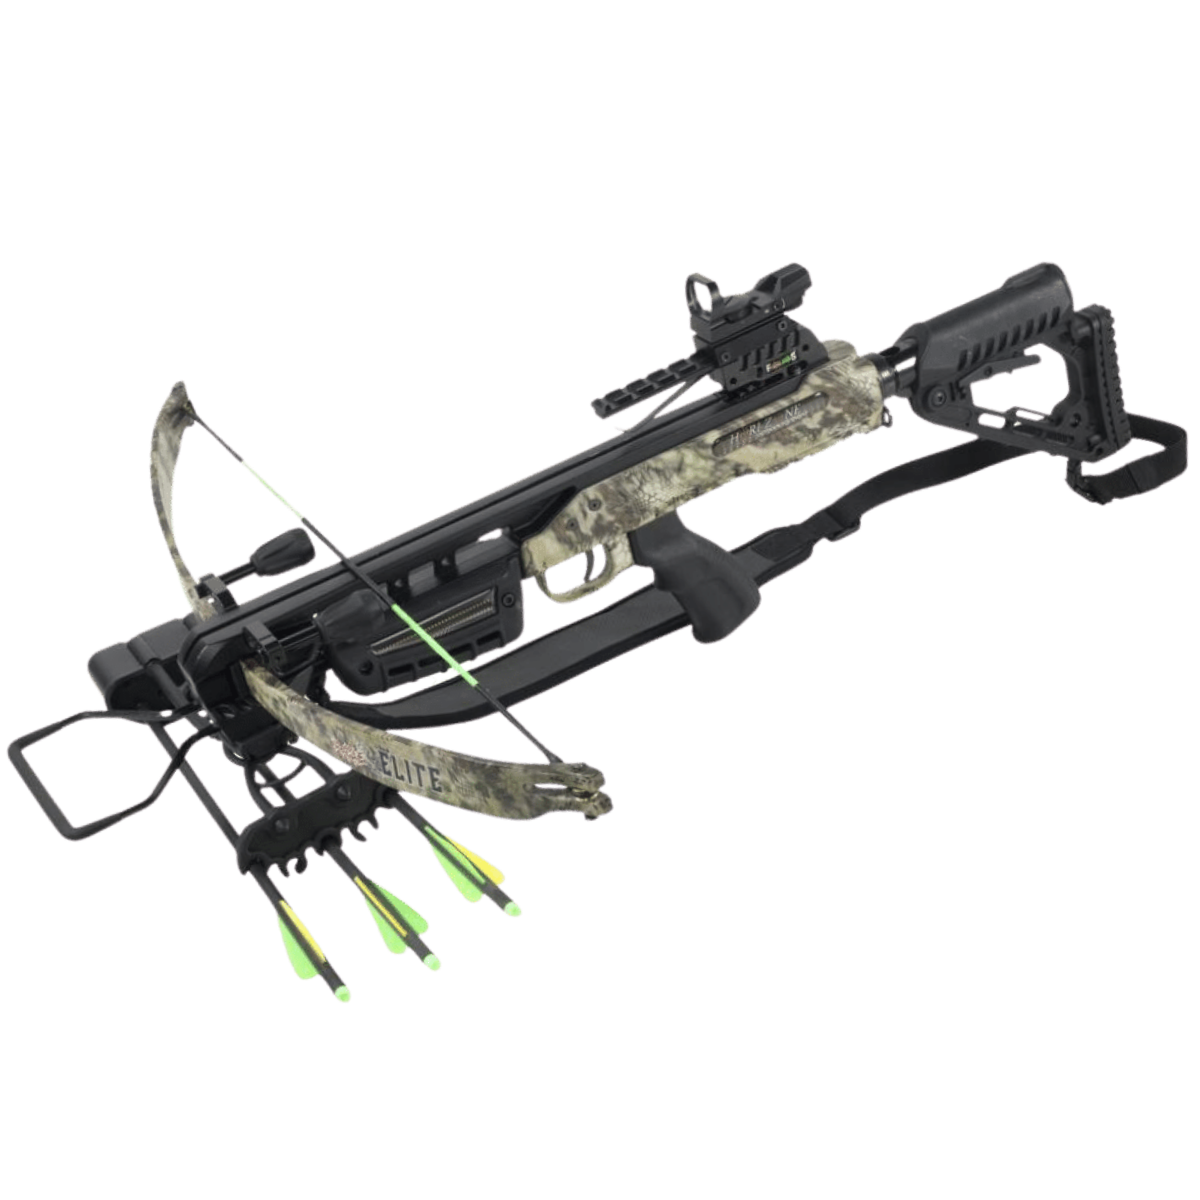 Hori-Zone Rage-Elite Crossbow Package 275fps - Fast UK Shipping | Tactical Archery UK